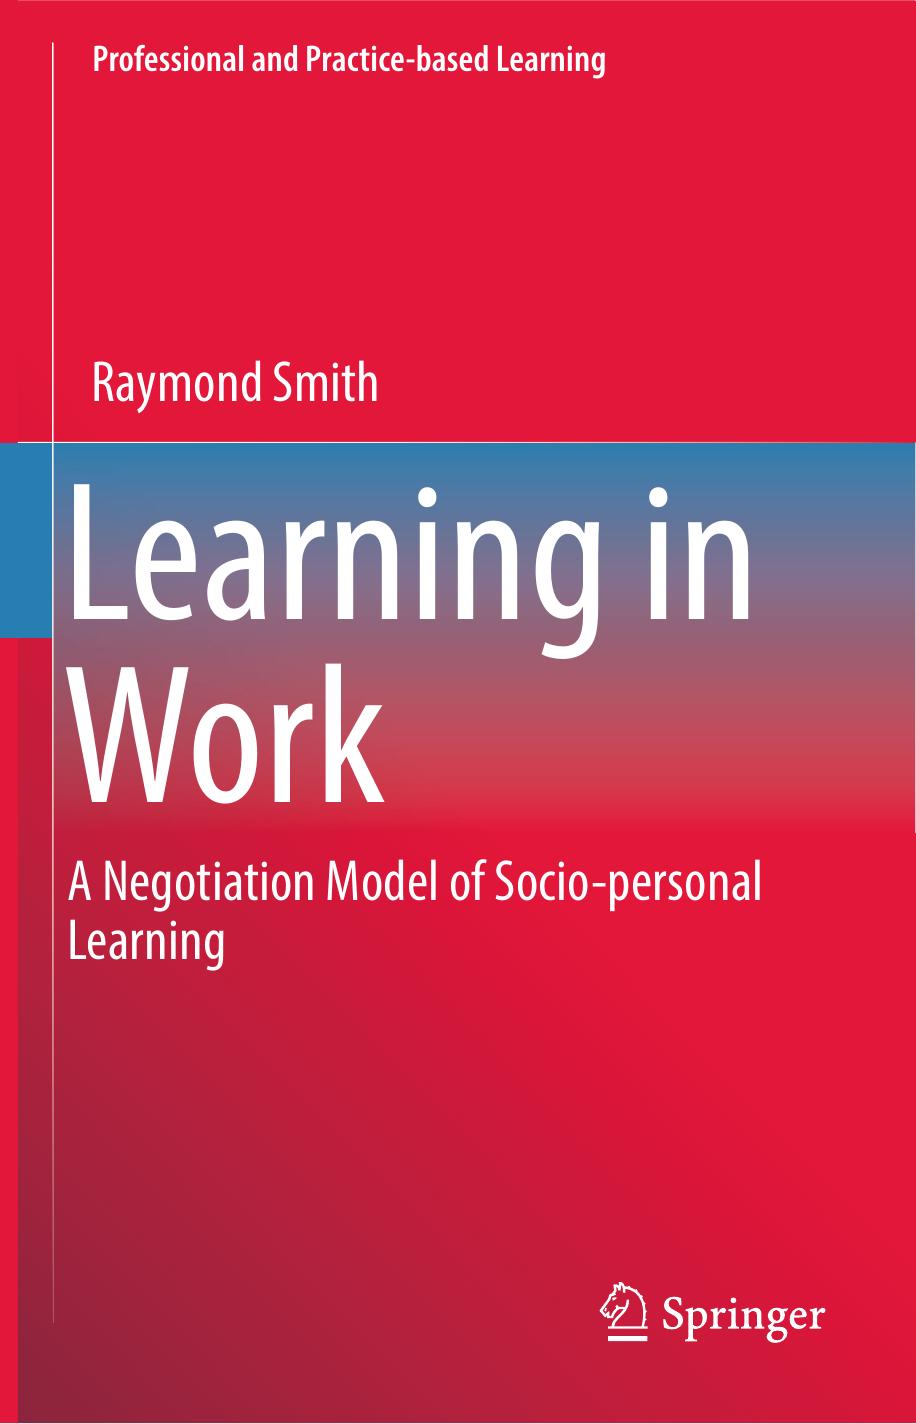 Learning in Work by Raymond Smith